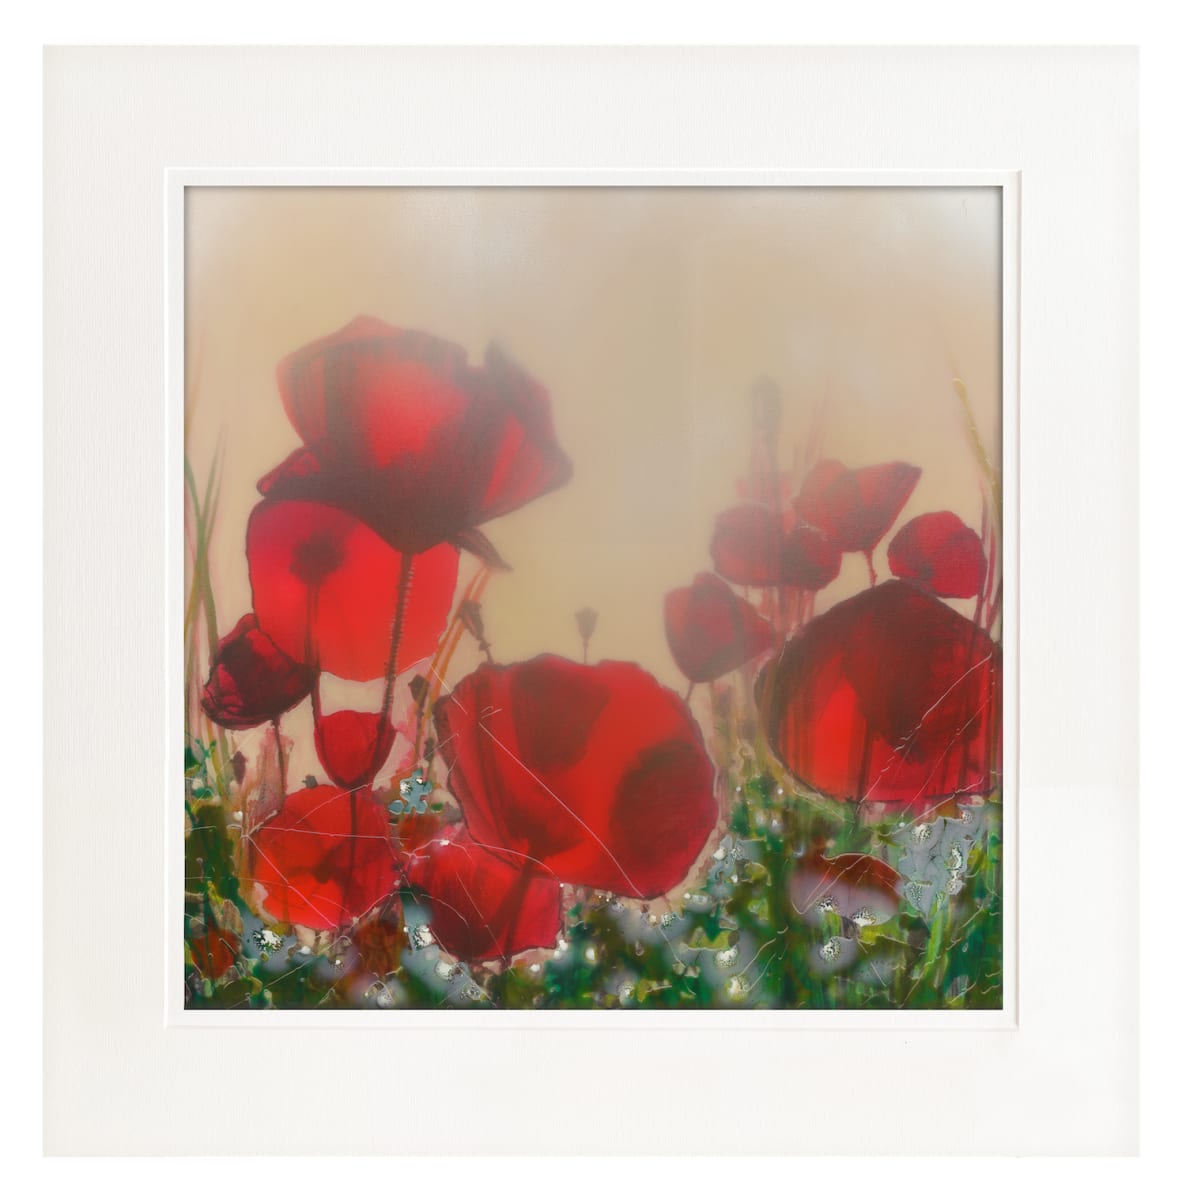 Wall art prints | Limited Edition Print | Poppy Haze - Signed Limited Edition Print with mount (unframed) - 150 in edition Proof 6 